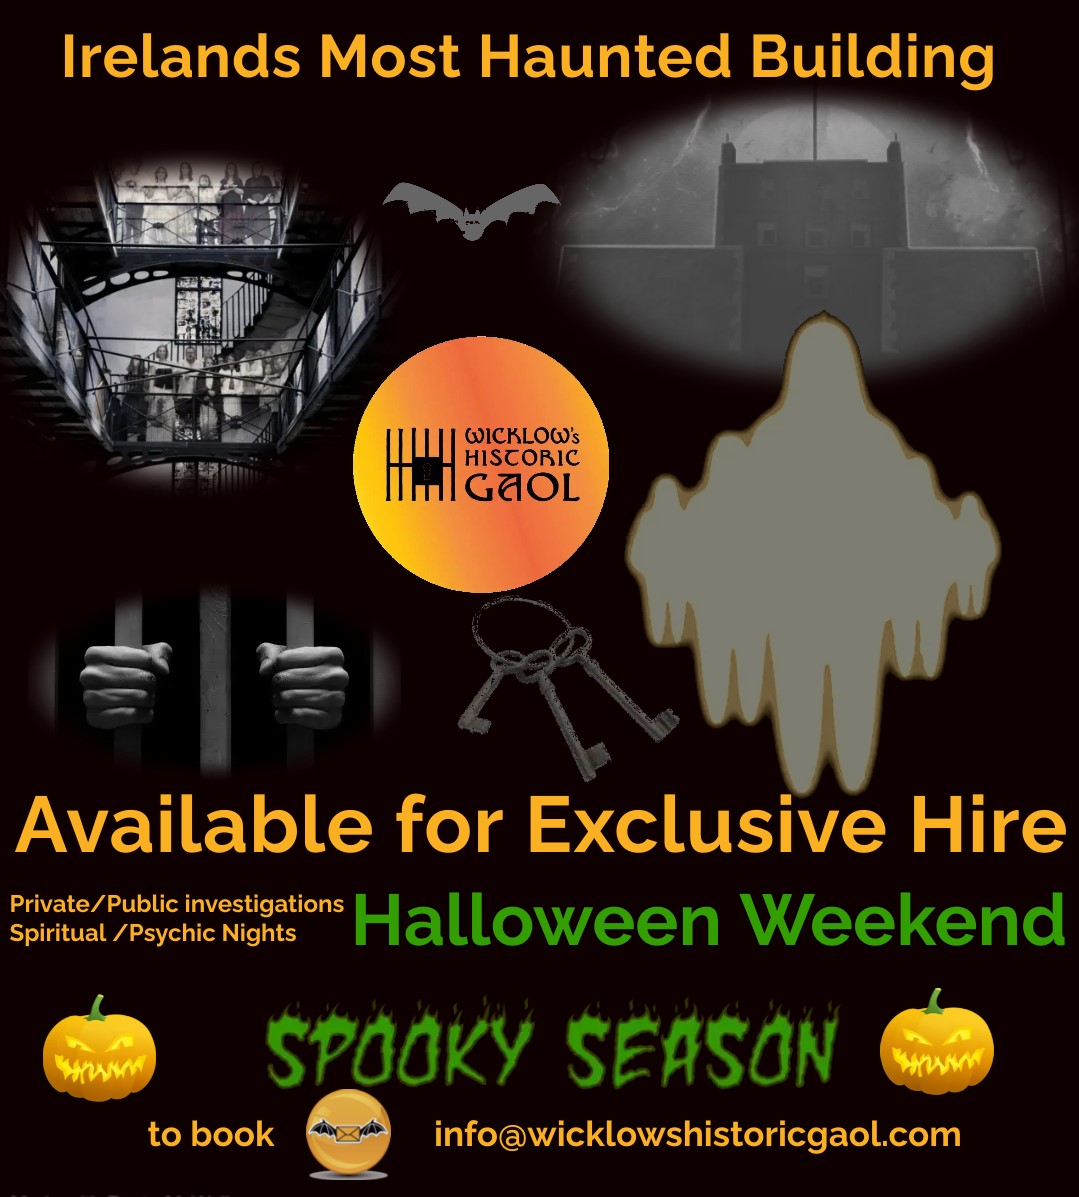 With Spooky Season is just around the corner Would you be brave enough to spend your time in Wicklow Gaol this Halloween for EXCLUSIVE HIRE email Info@wicklowshistoricgaol.com to book your Private/Public investigation /Spiritual /Psychic Night #Halloween